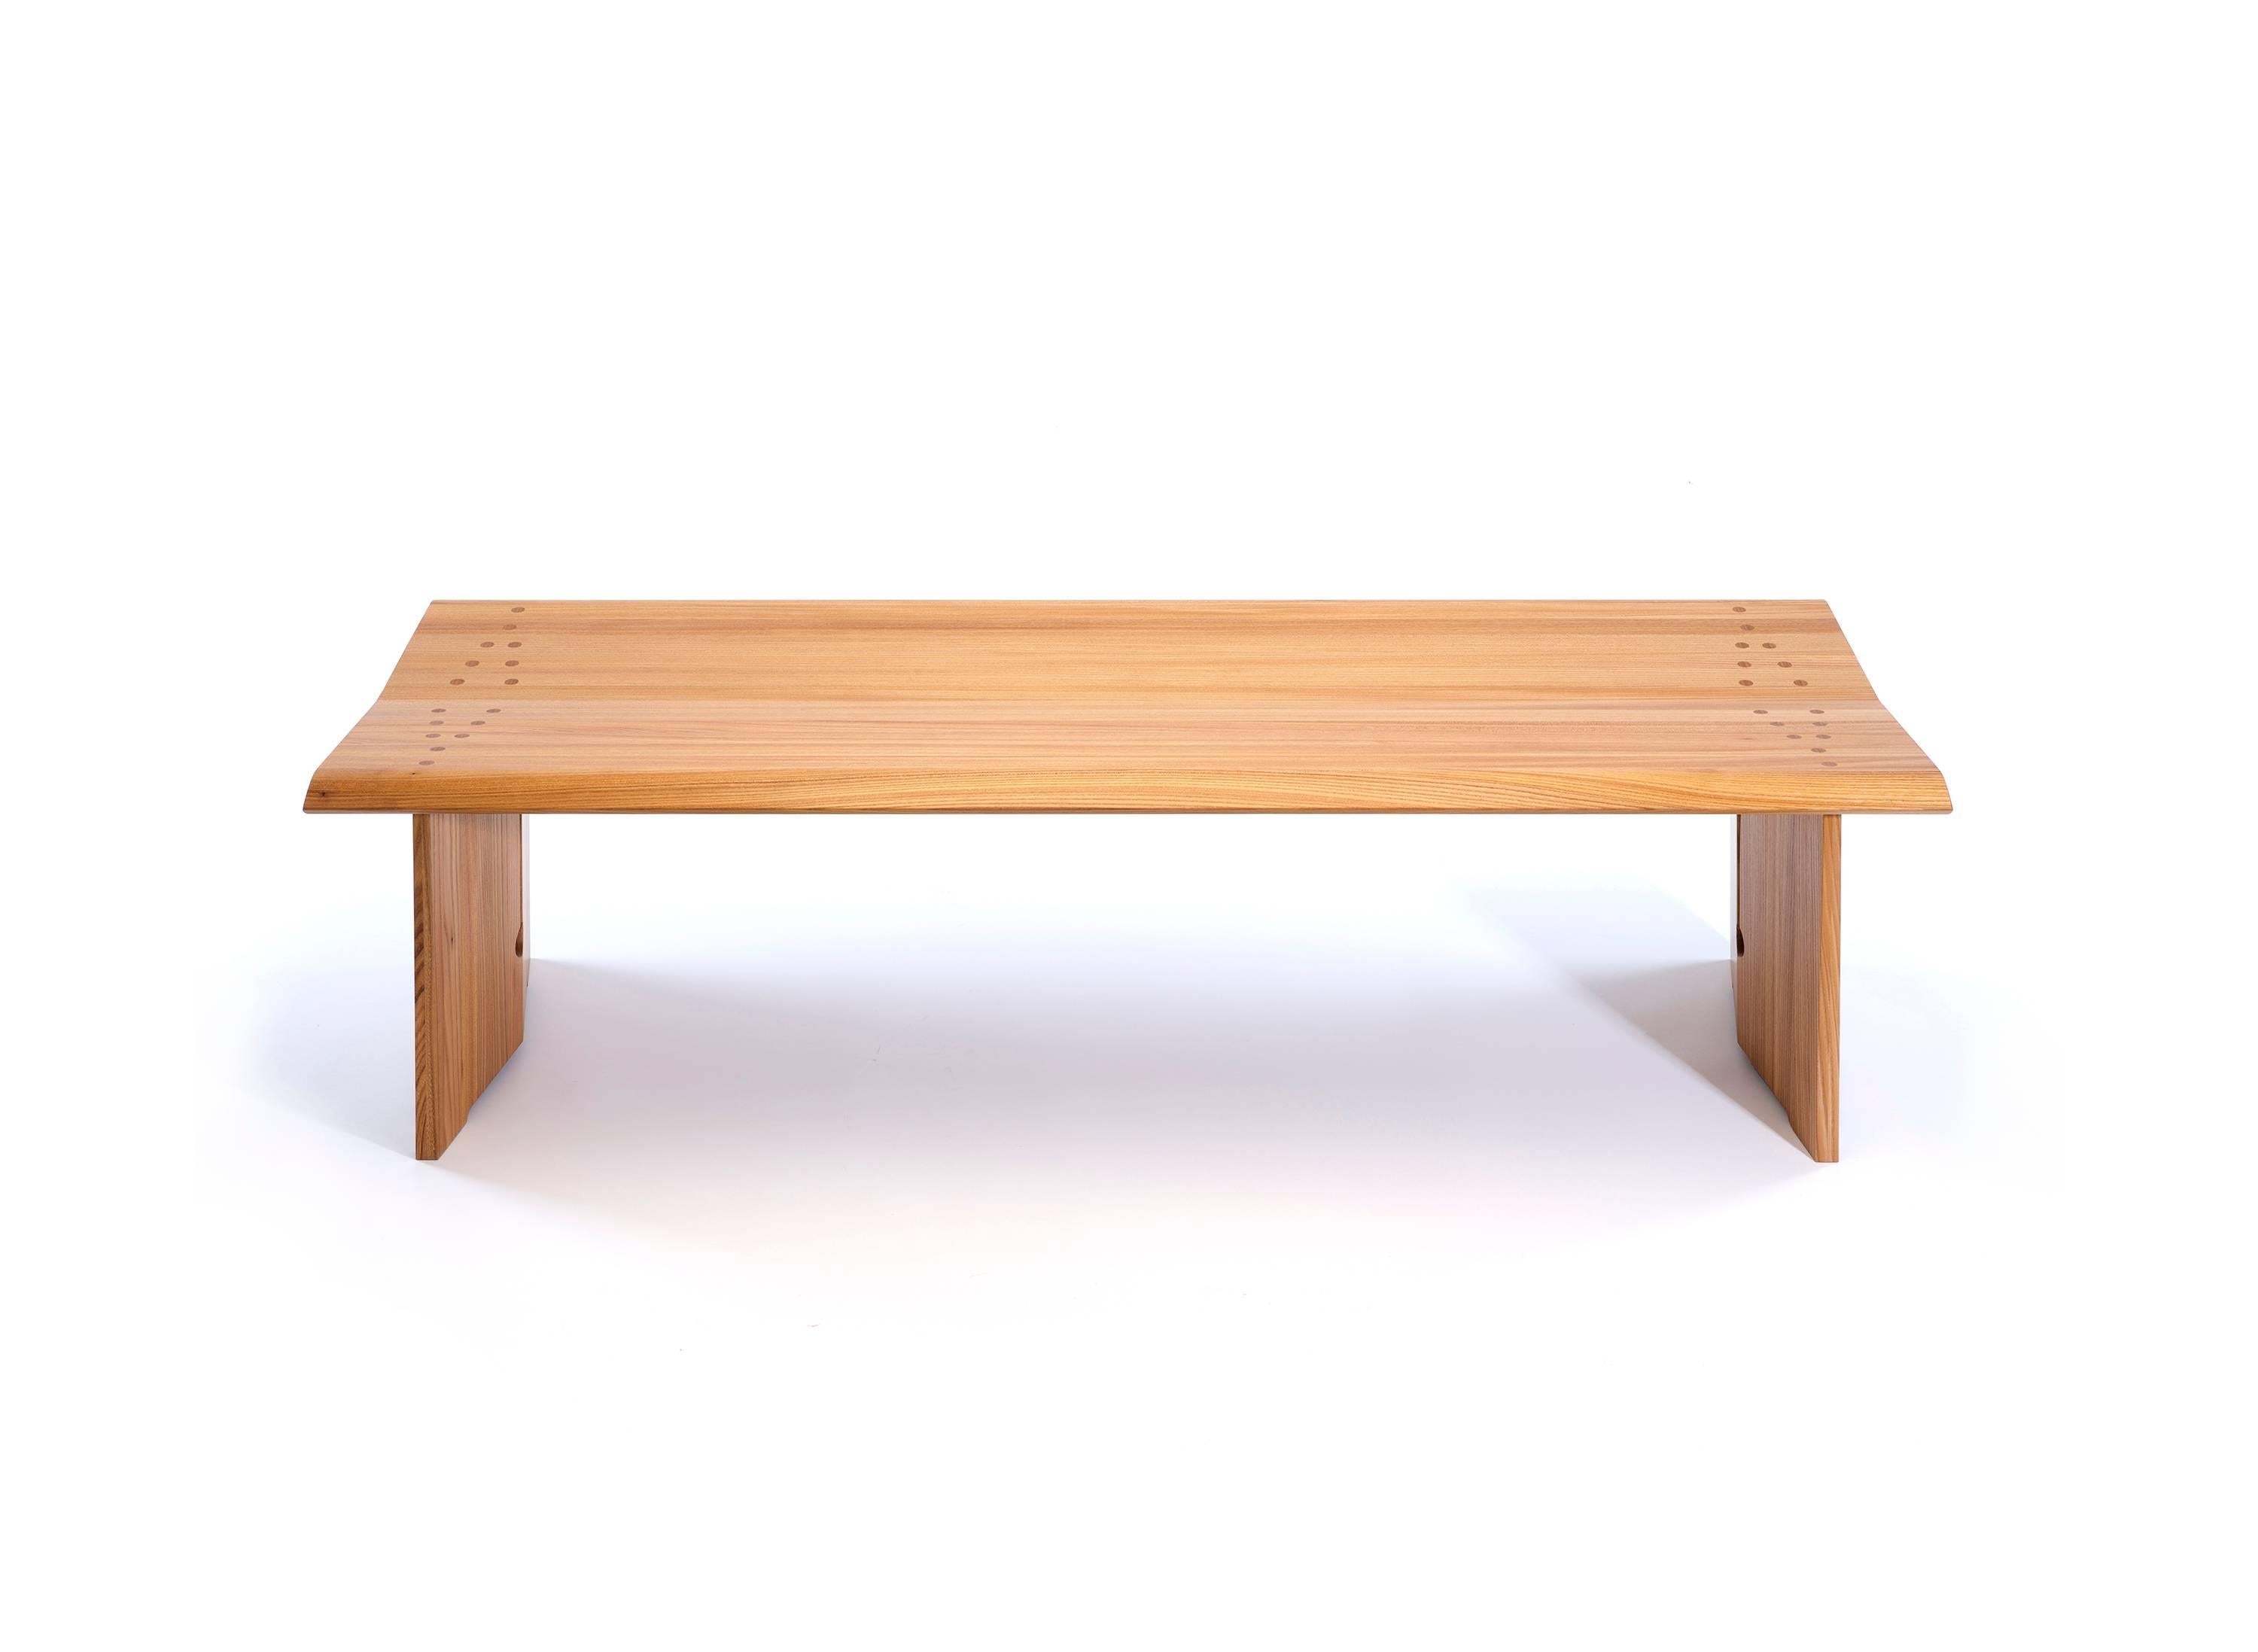 Stingray Bench is a red elm bench made by Michael Hurwitz.

Michael Hurwitz has been making studio furniture since earning a BFA from Boston University’s Program in Artisanry in 1979 and was Head of the Wood Department at University of the Arts,